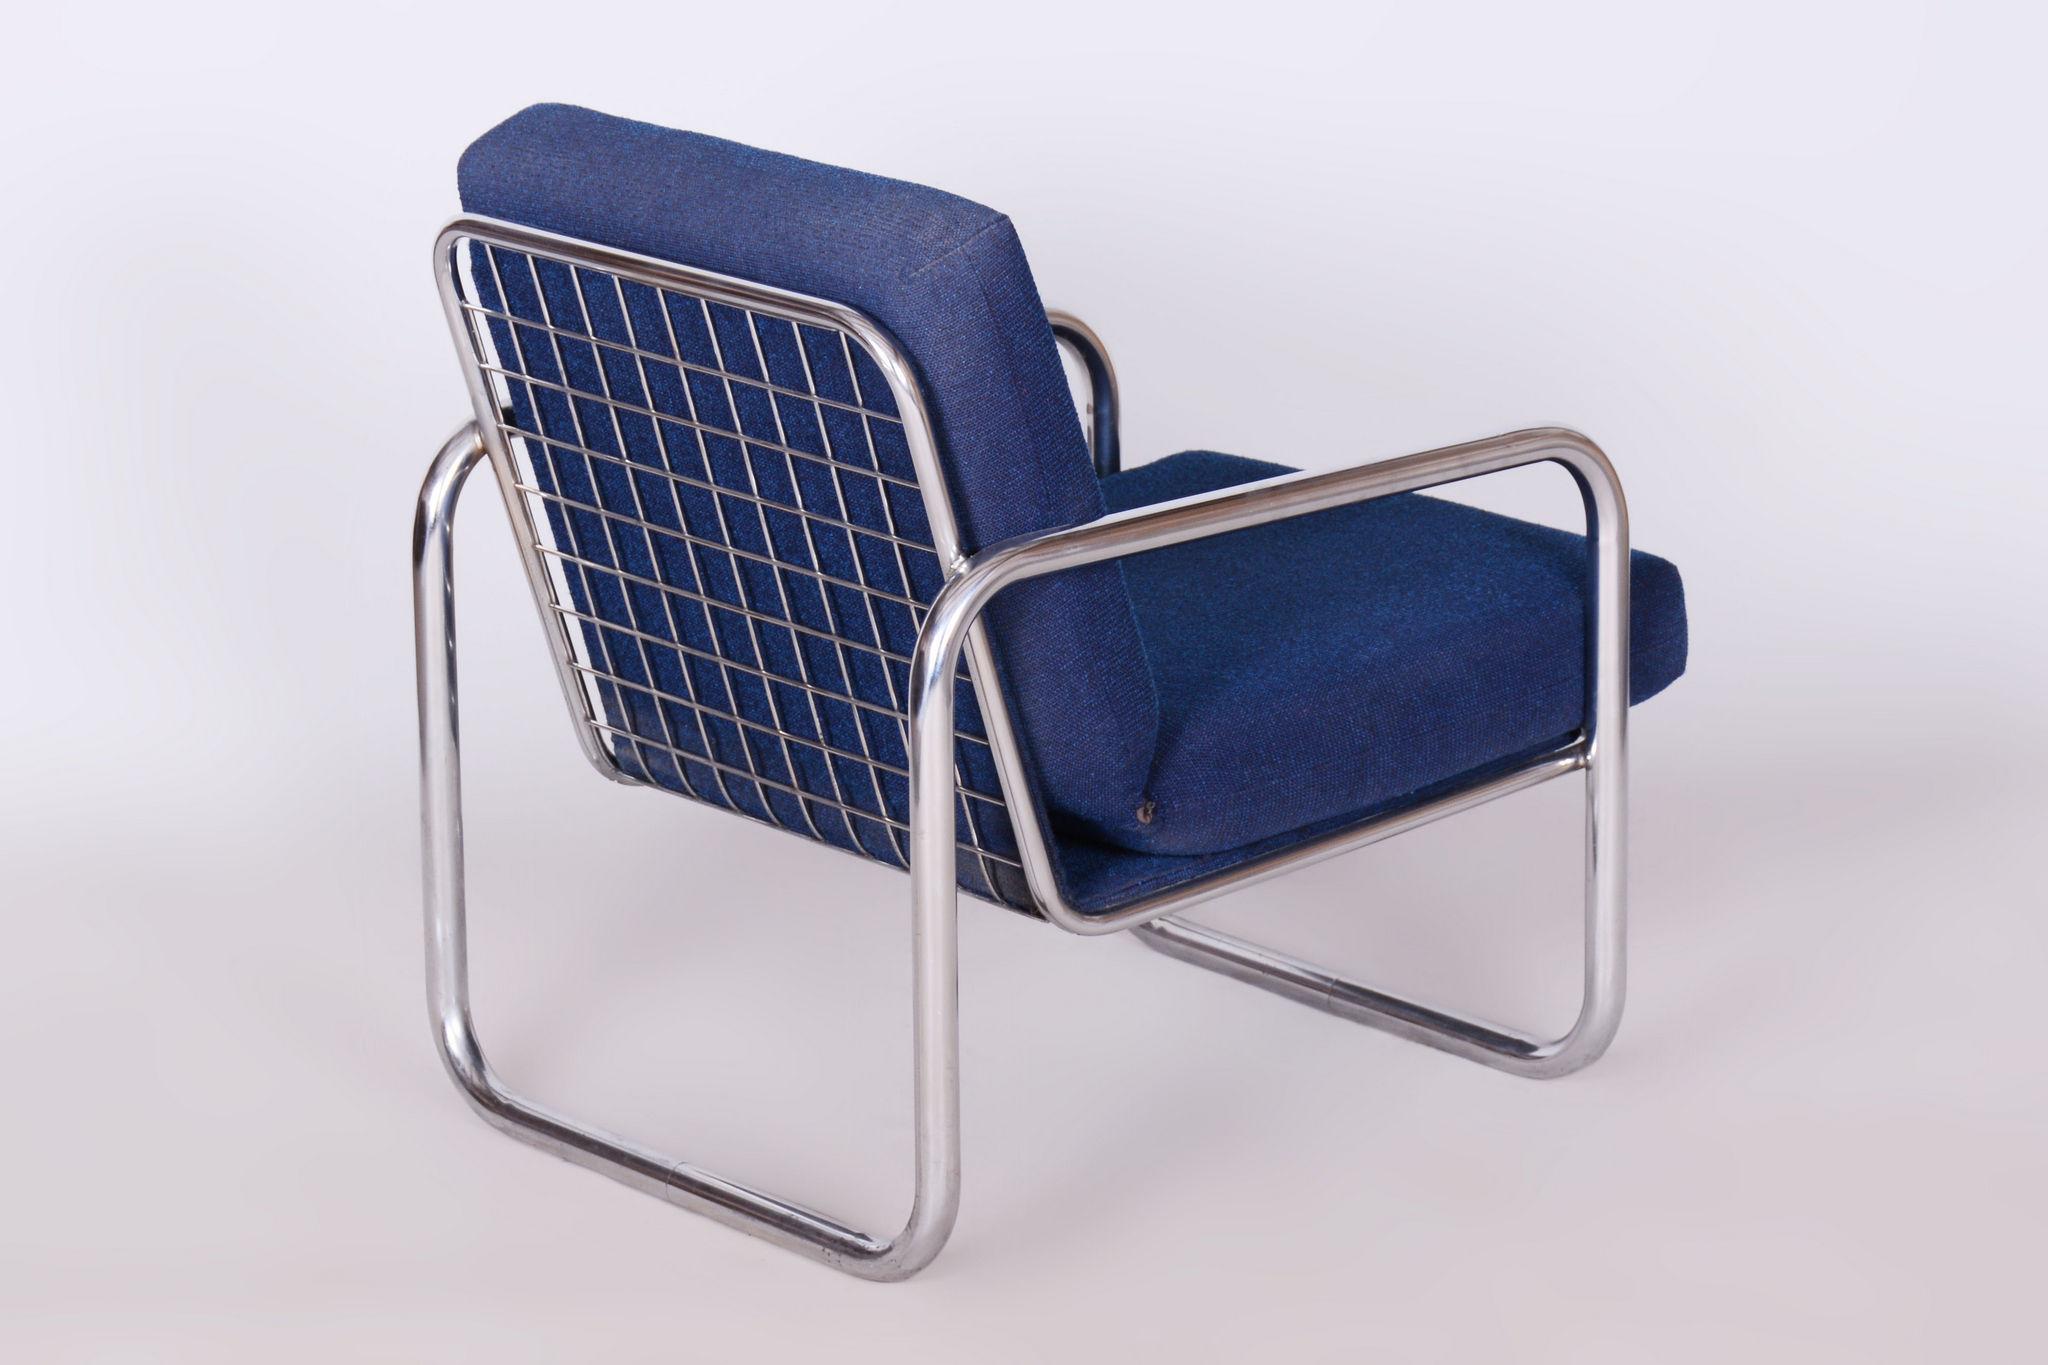 Original Bauhaus Armchair, Chrome-Plated Steel, Cleaned Upholstery, Czech, 1950s For Sale 4